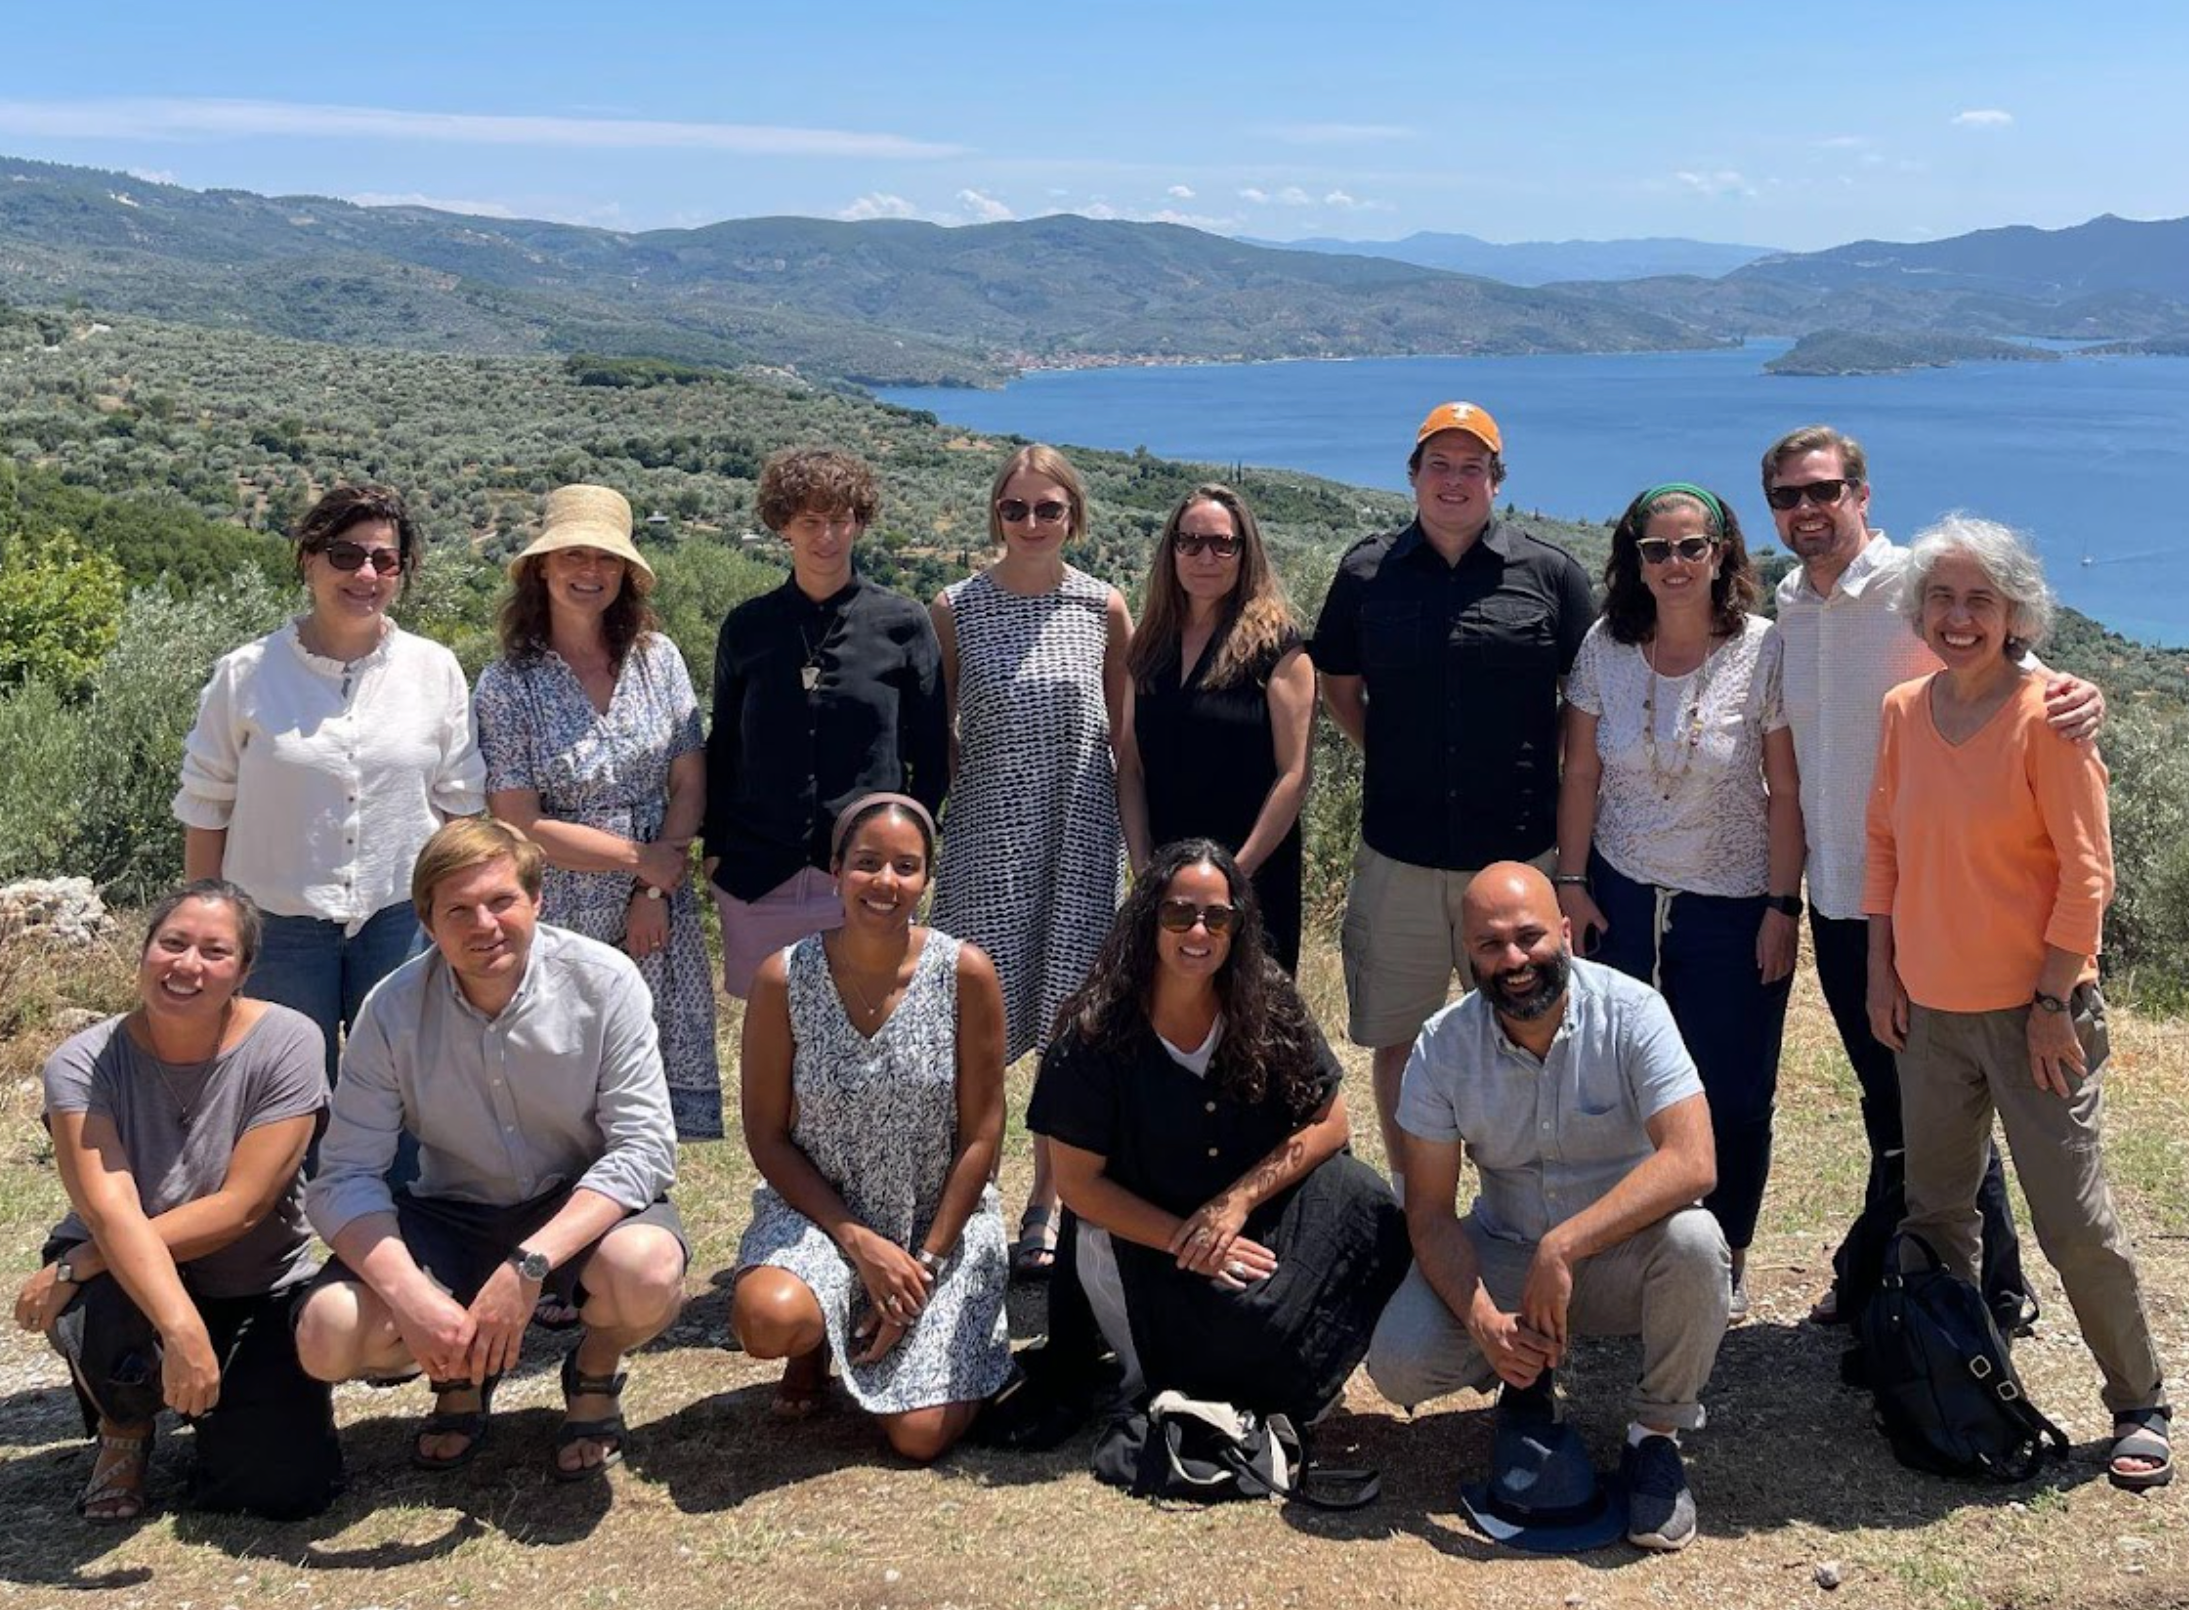 A photograph of members of the EHCN steering committee. They are standing in front of a scenic view in Greece.